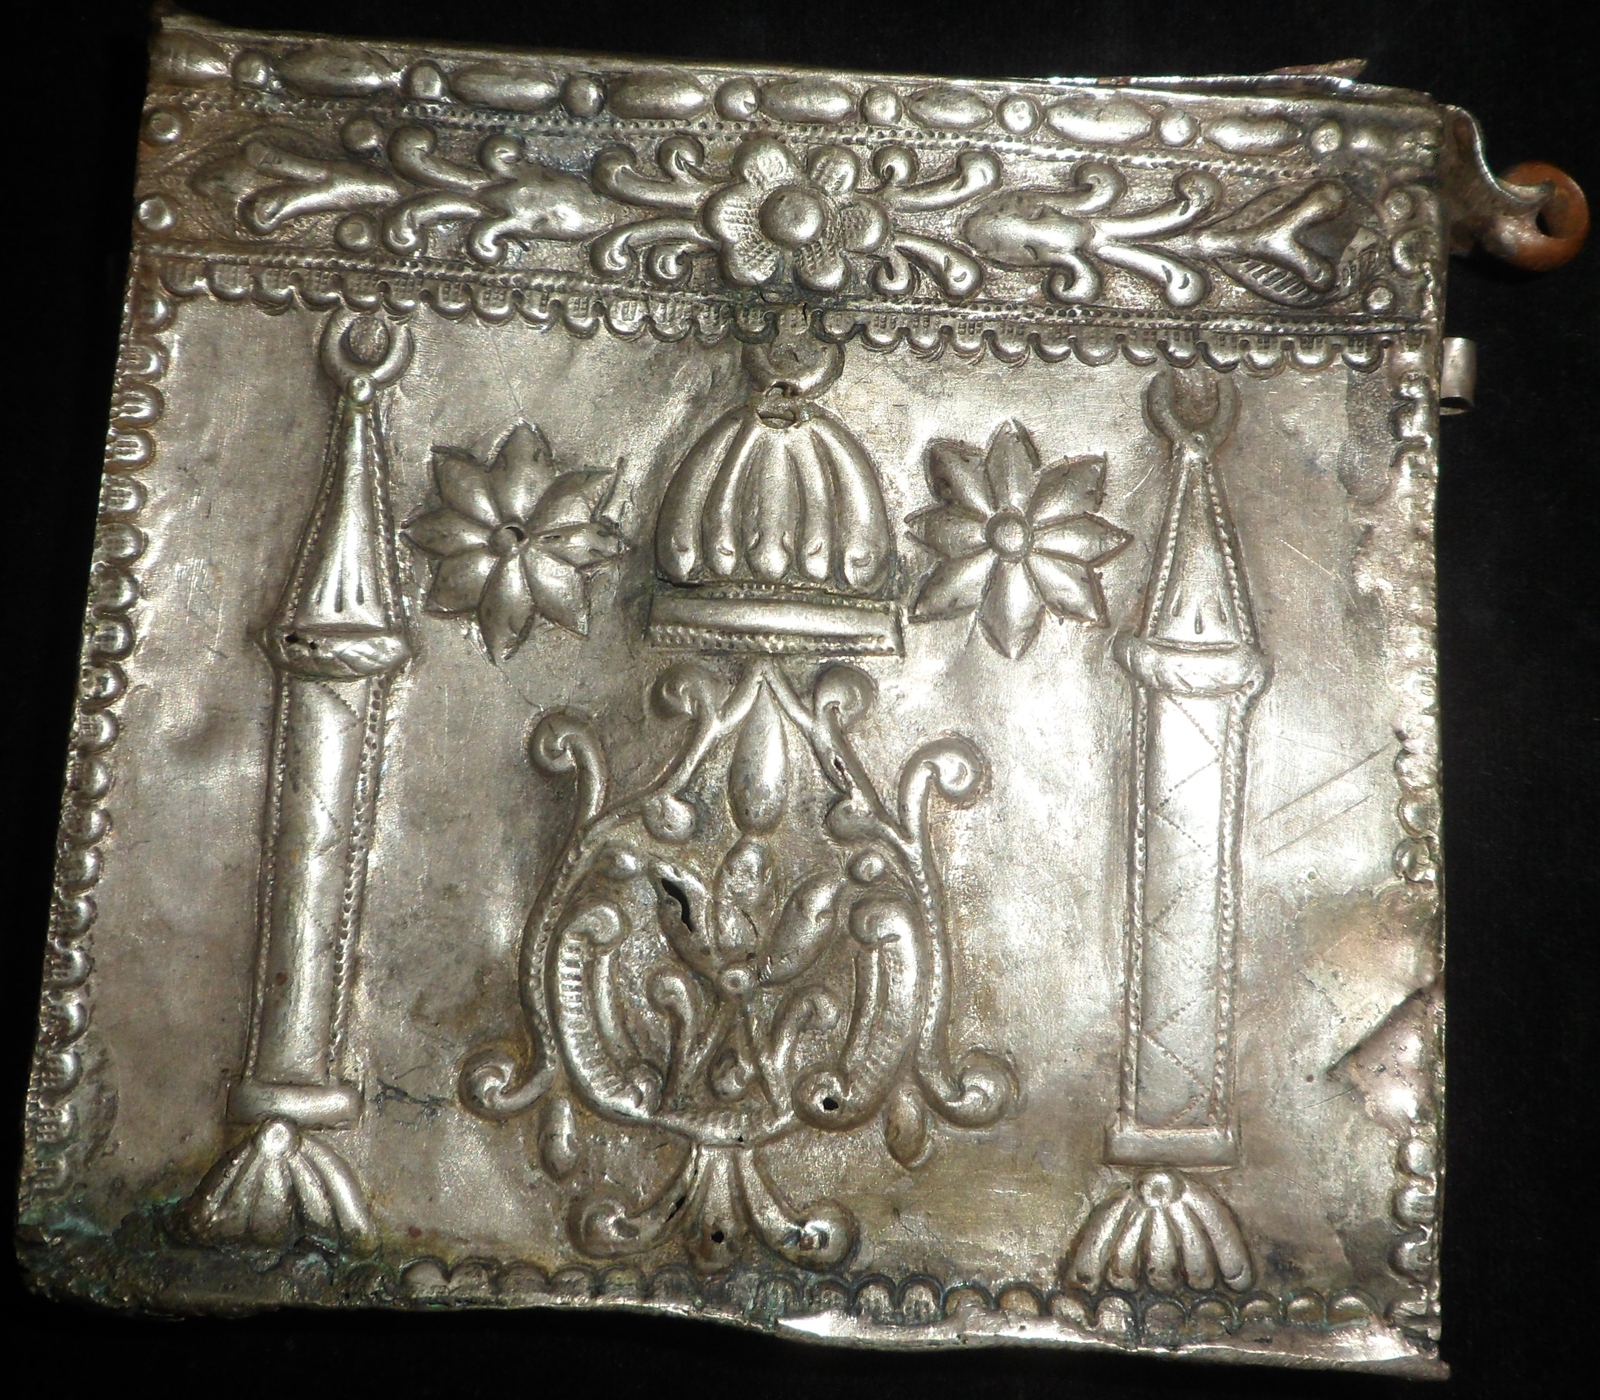 OLD ANTIQUE ISLAMIC OFFICER'S SOLID SILVER PRAYER-SCROLL CASE. - $595.00